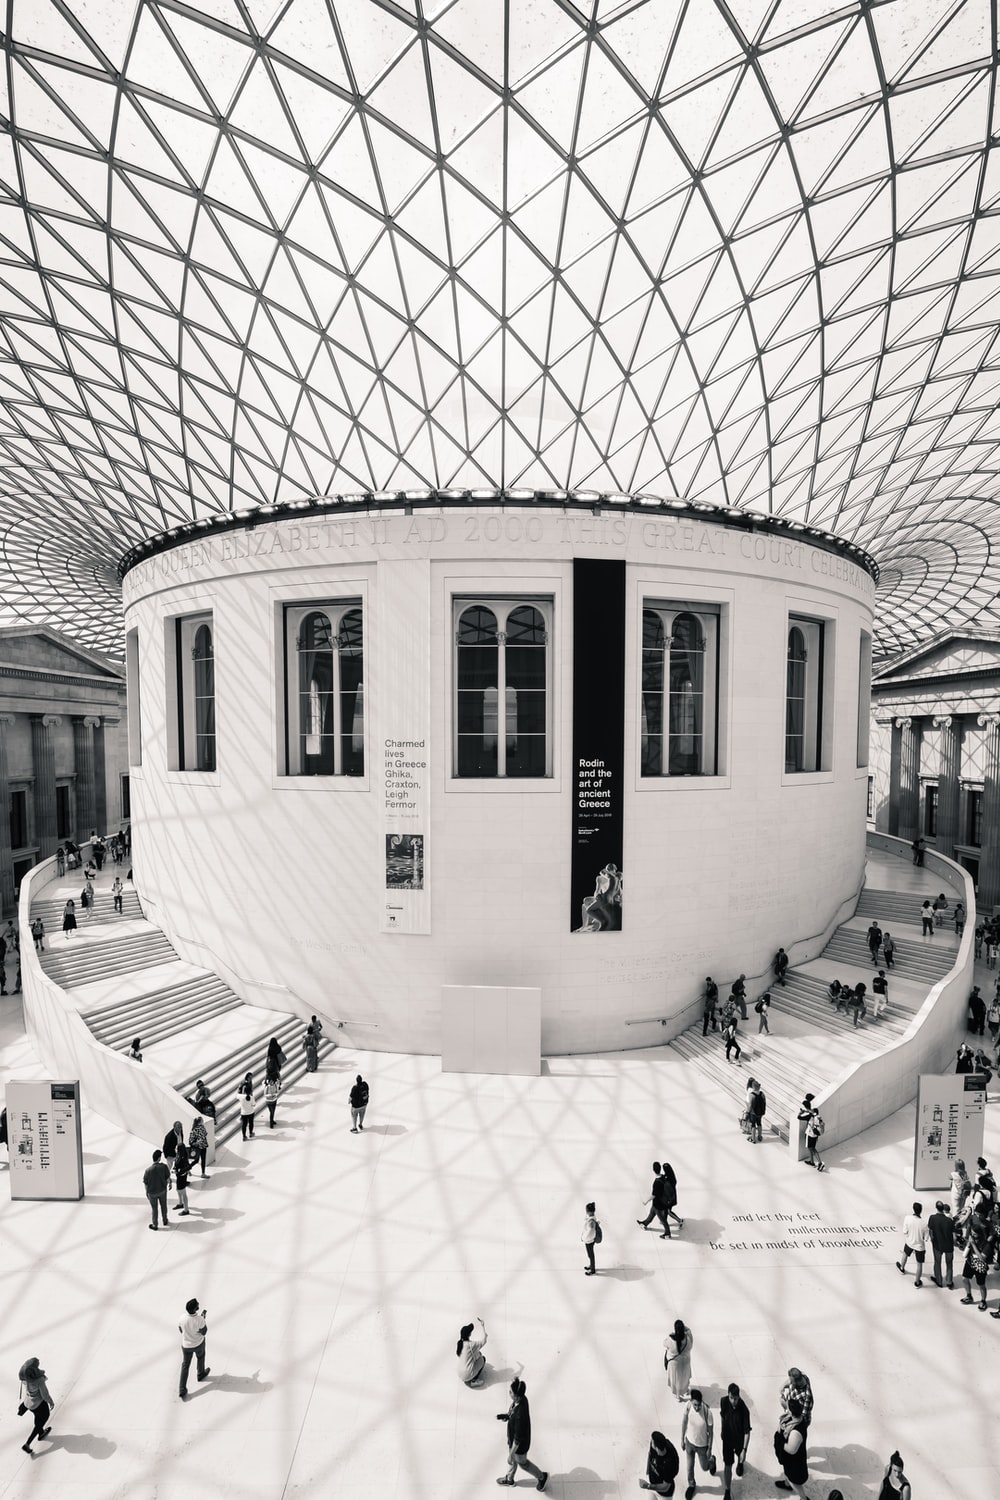 The British Museum Picture. Download Free Image